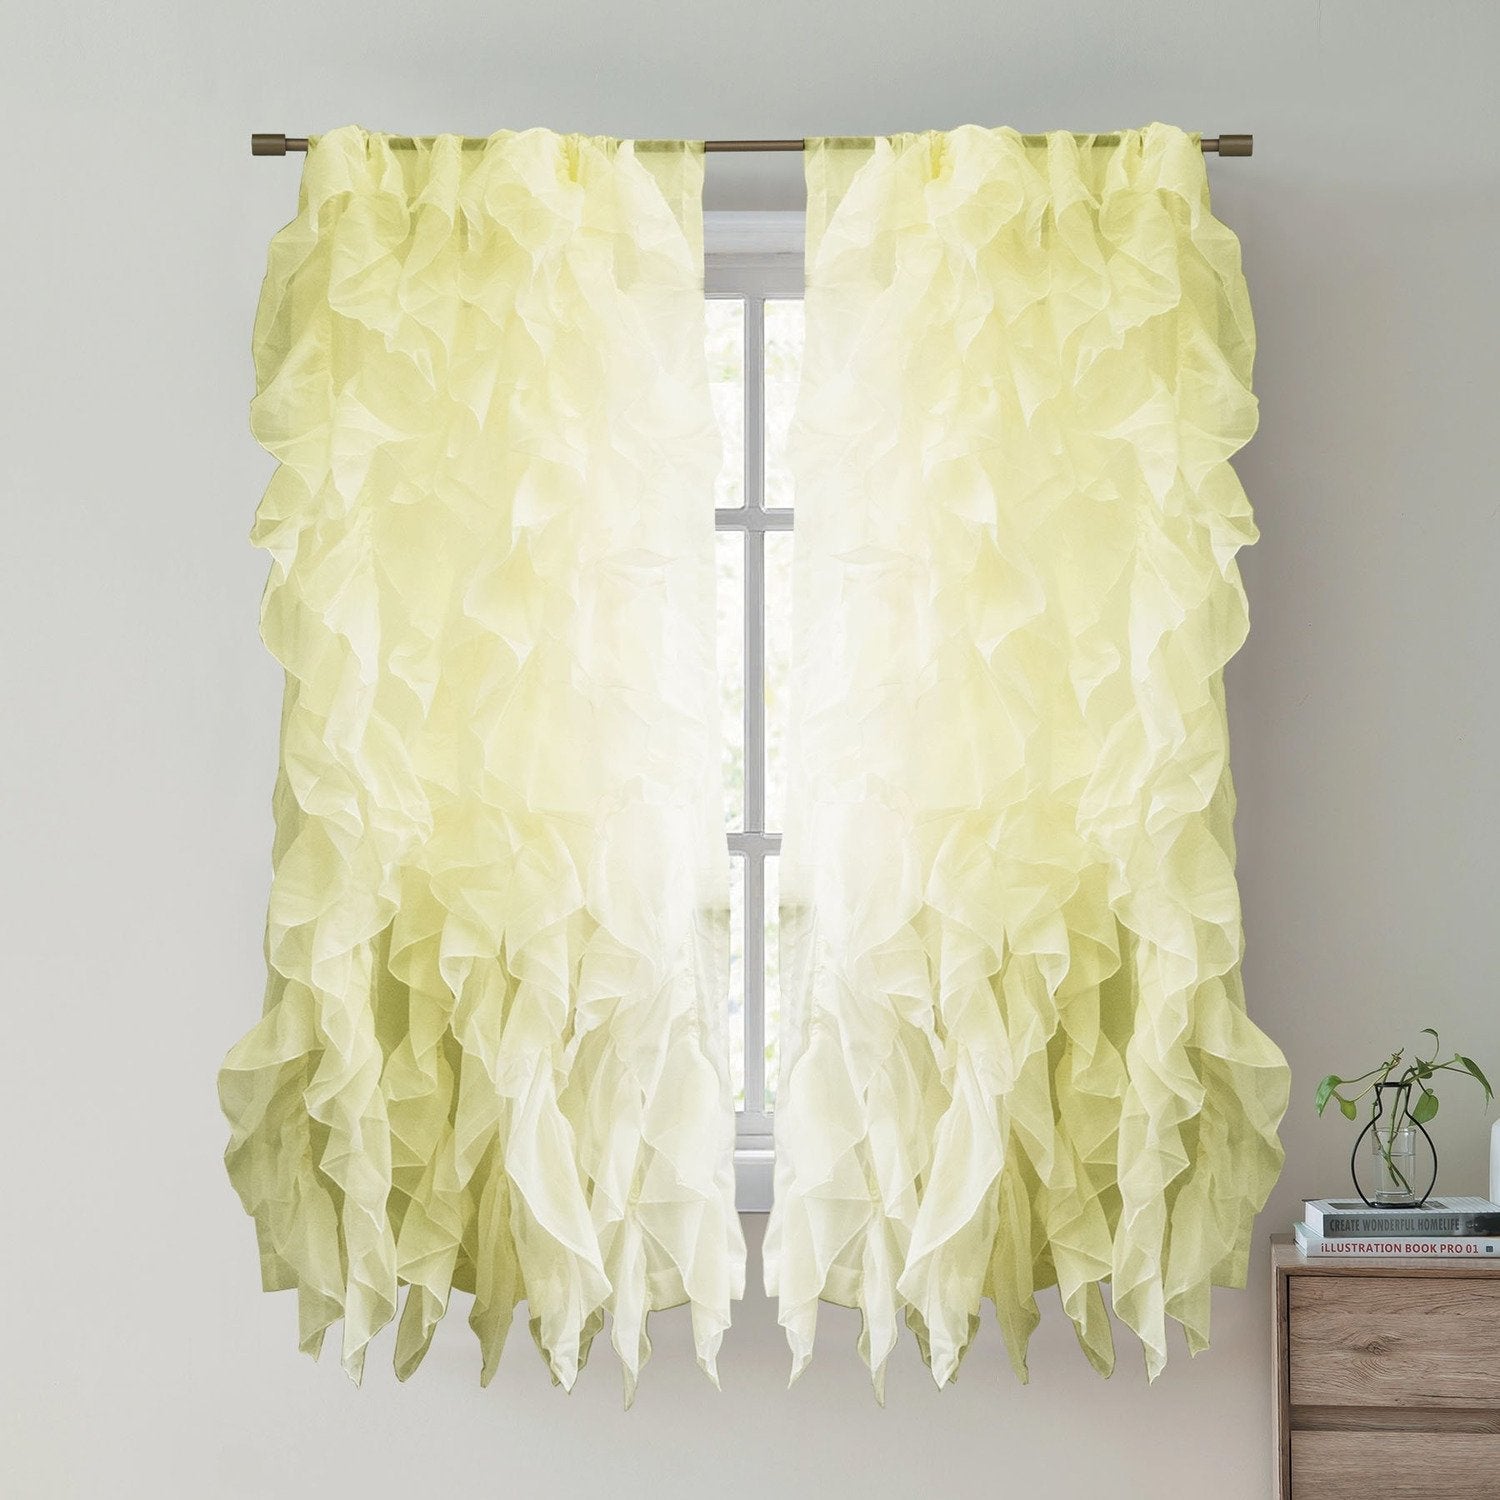 Chic Sheer Voile Ruffled Window Curtain 2-Pack Maize 63X100